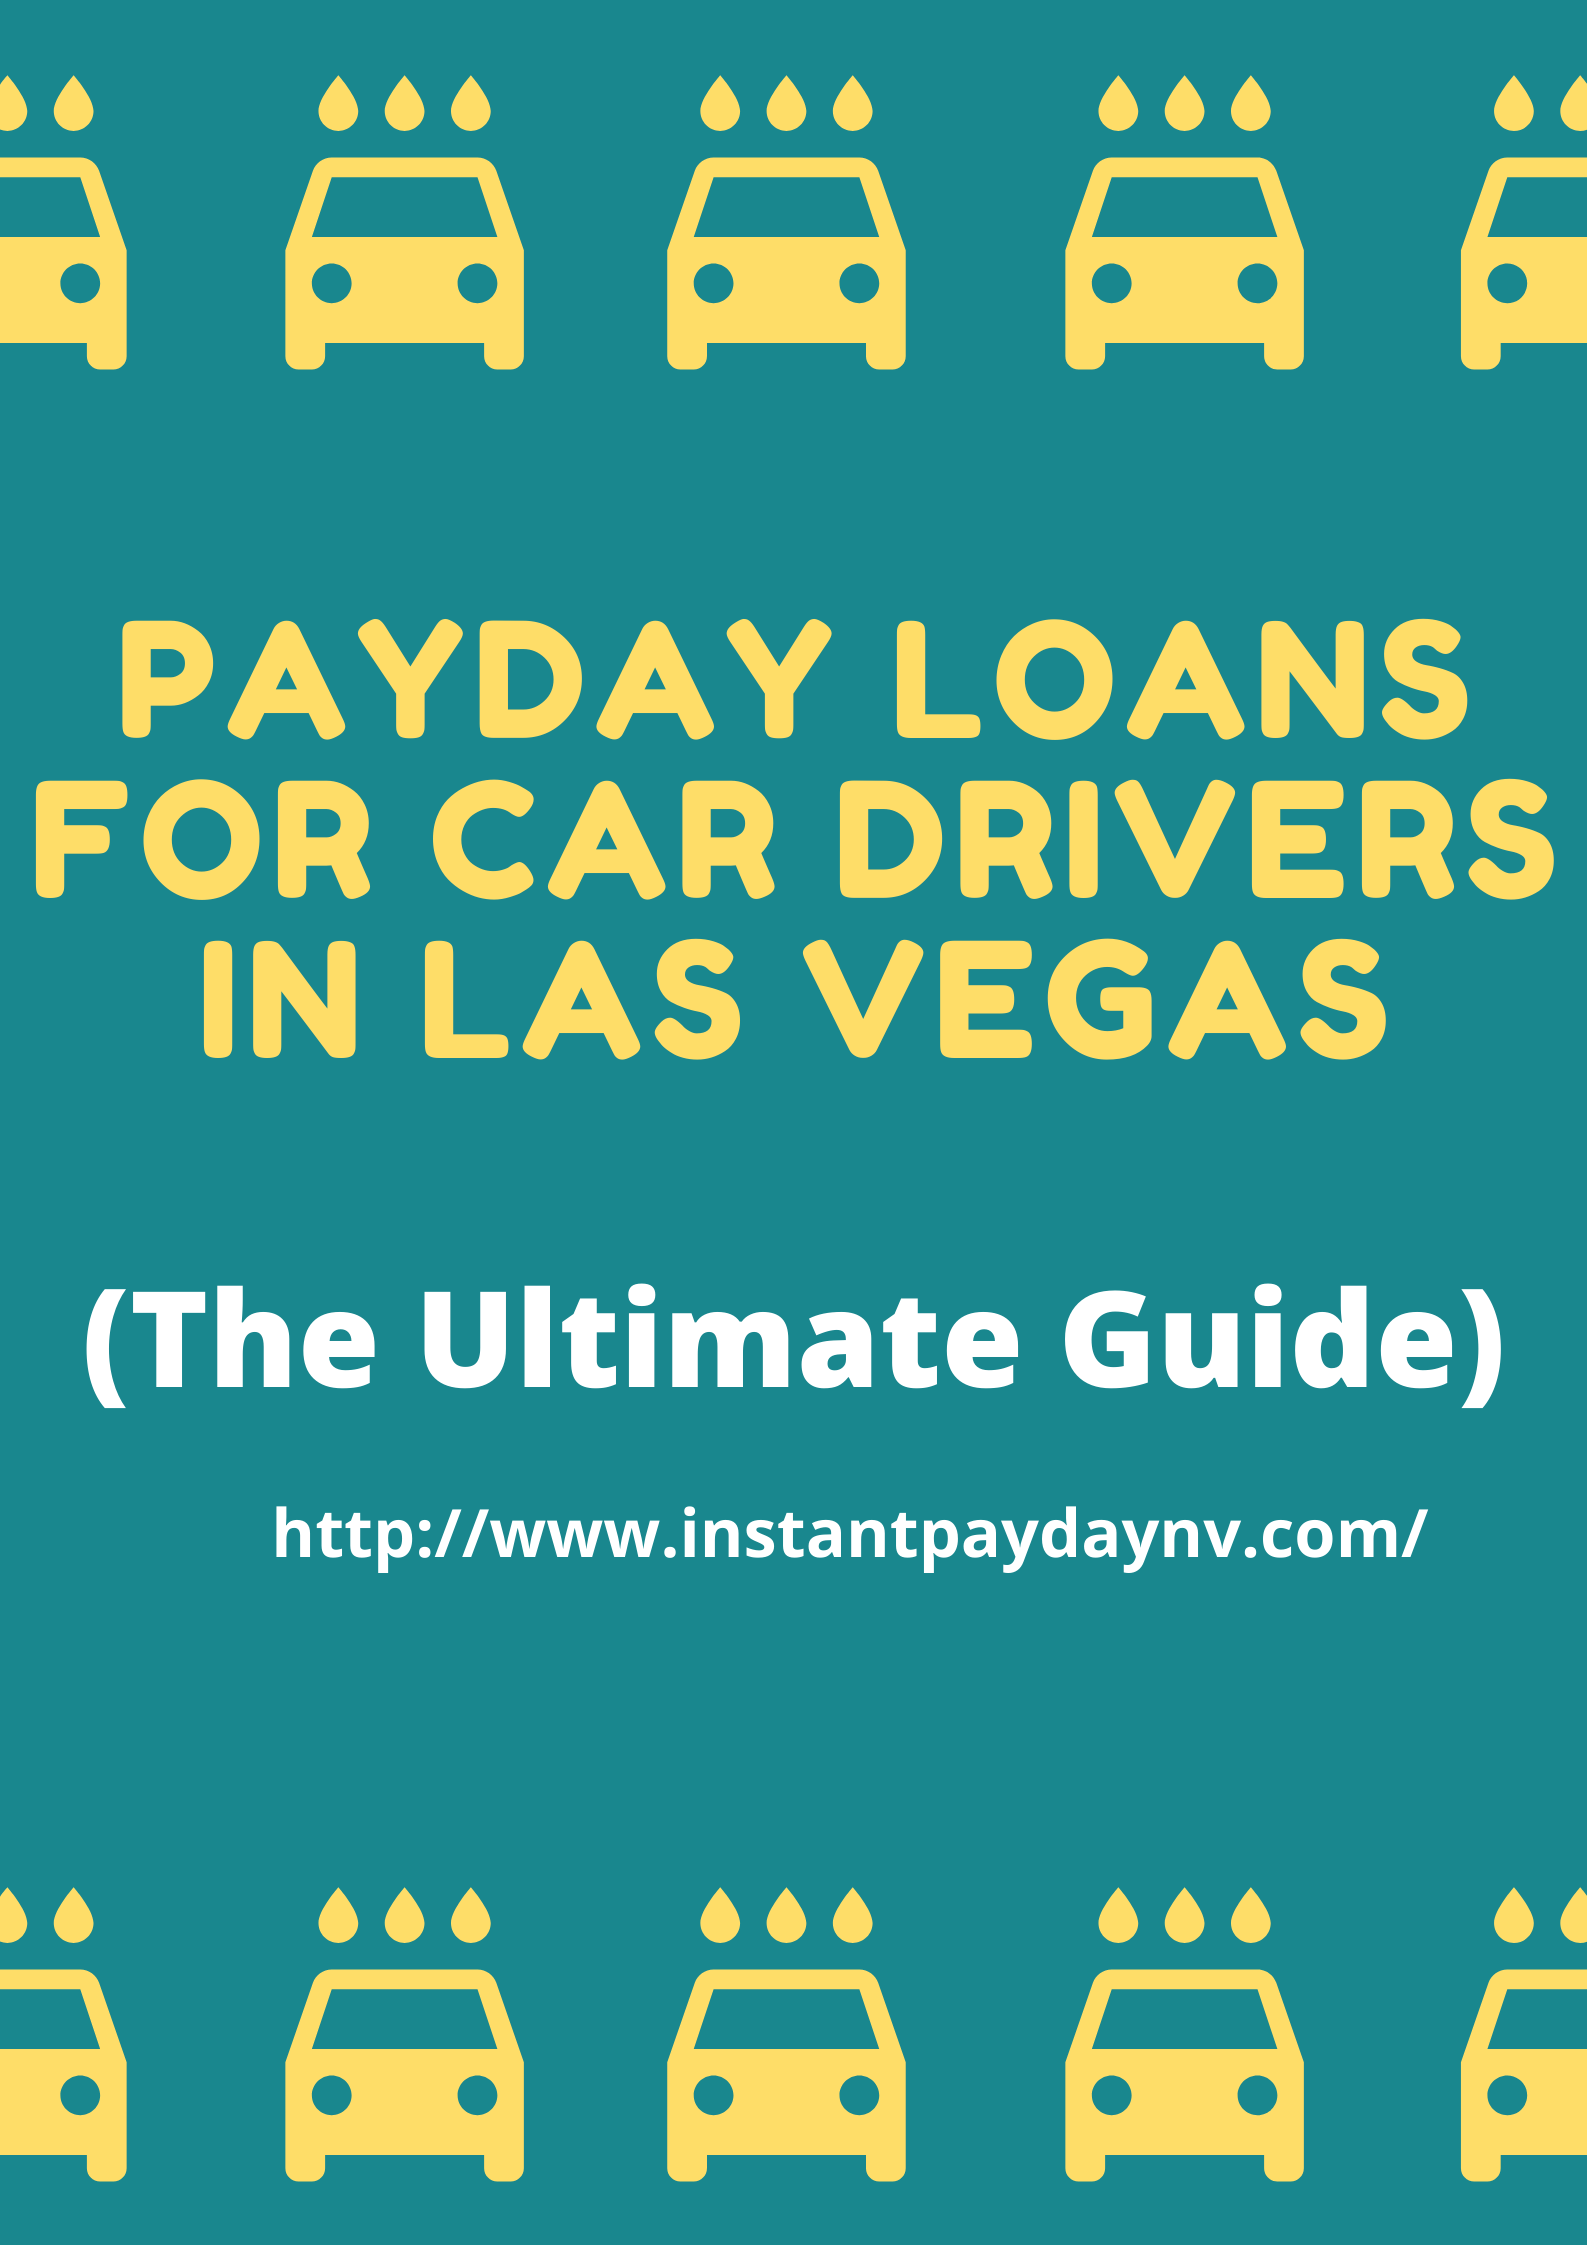 Payday loans for Car drivers in Las Vegas (the Ultimate Guide)